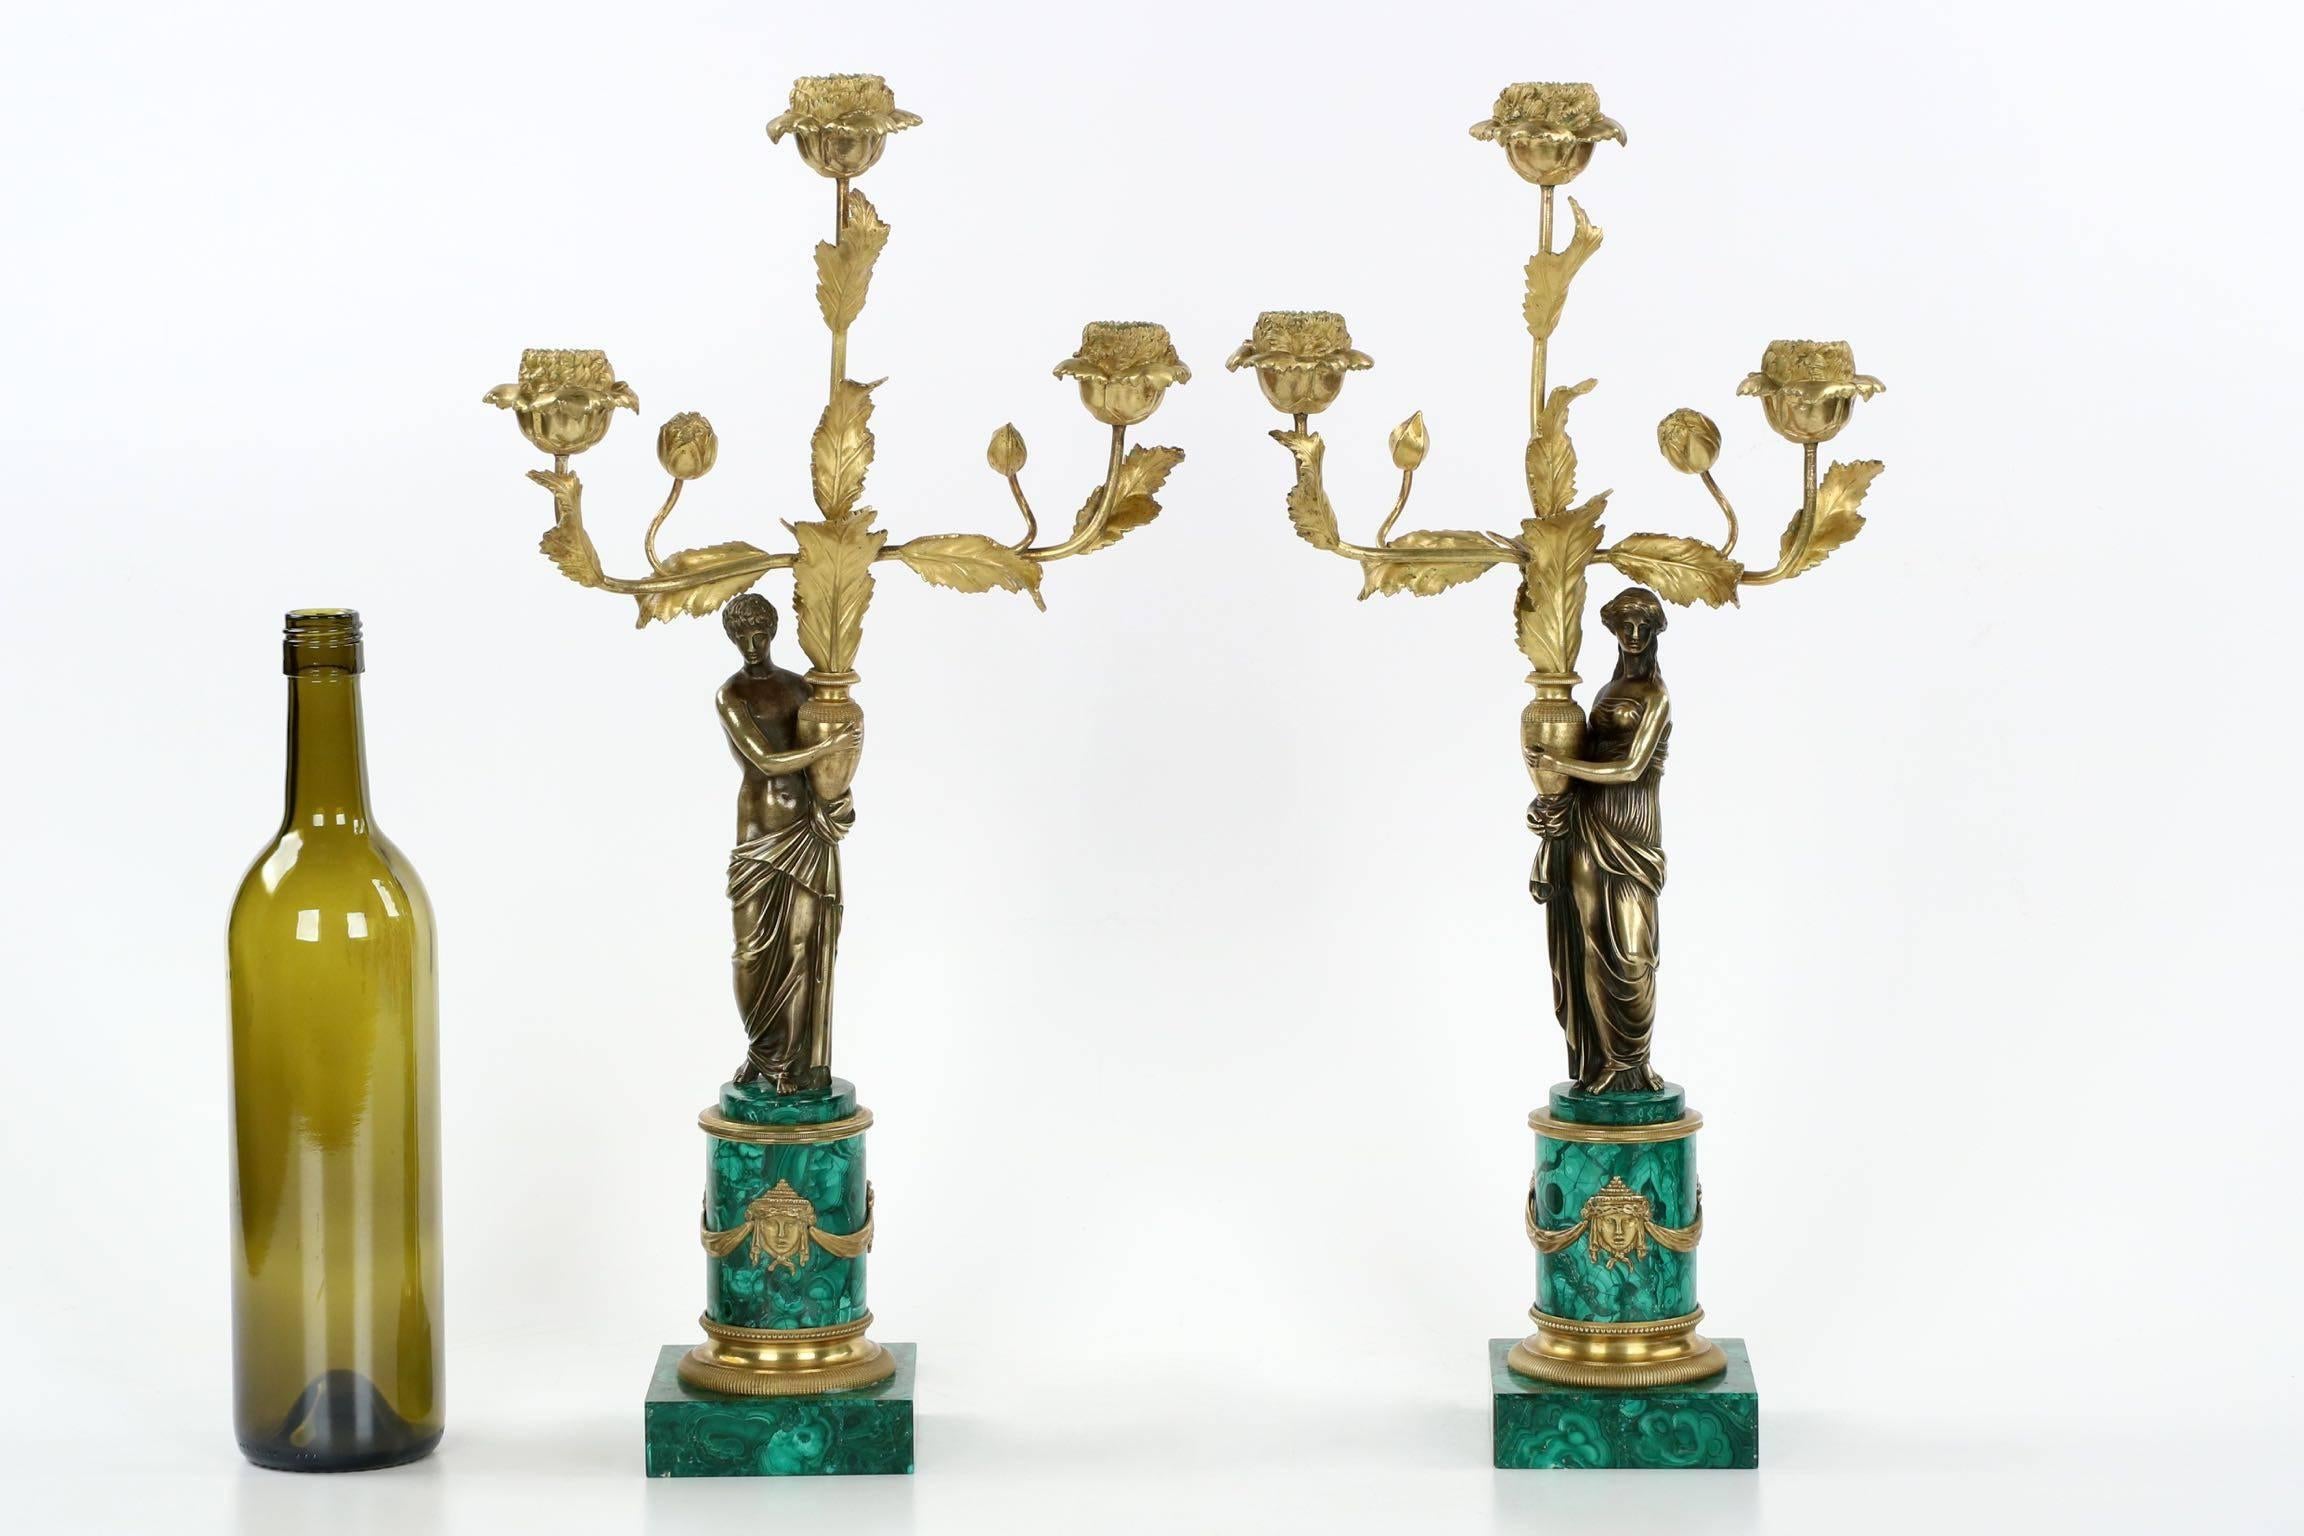 A most attractive pair of late 19th century candelabra in the Empire taste, the male and female figurals raise gilded stems of serrated foliage and budding flowers, the tips culminating in three fully developed flowers holding candle wells. The pair